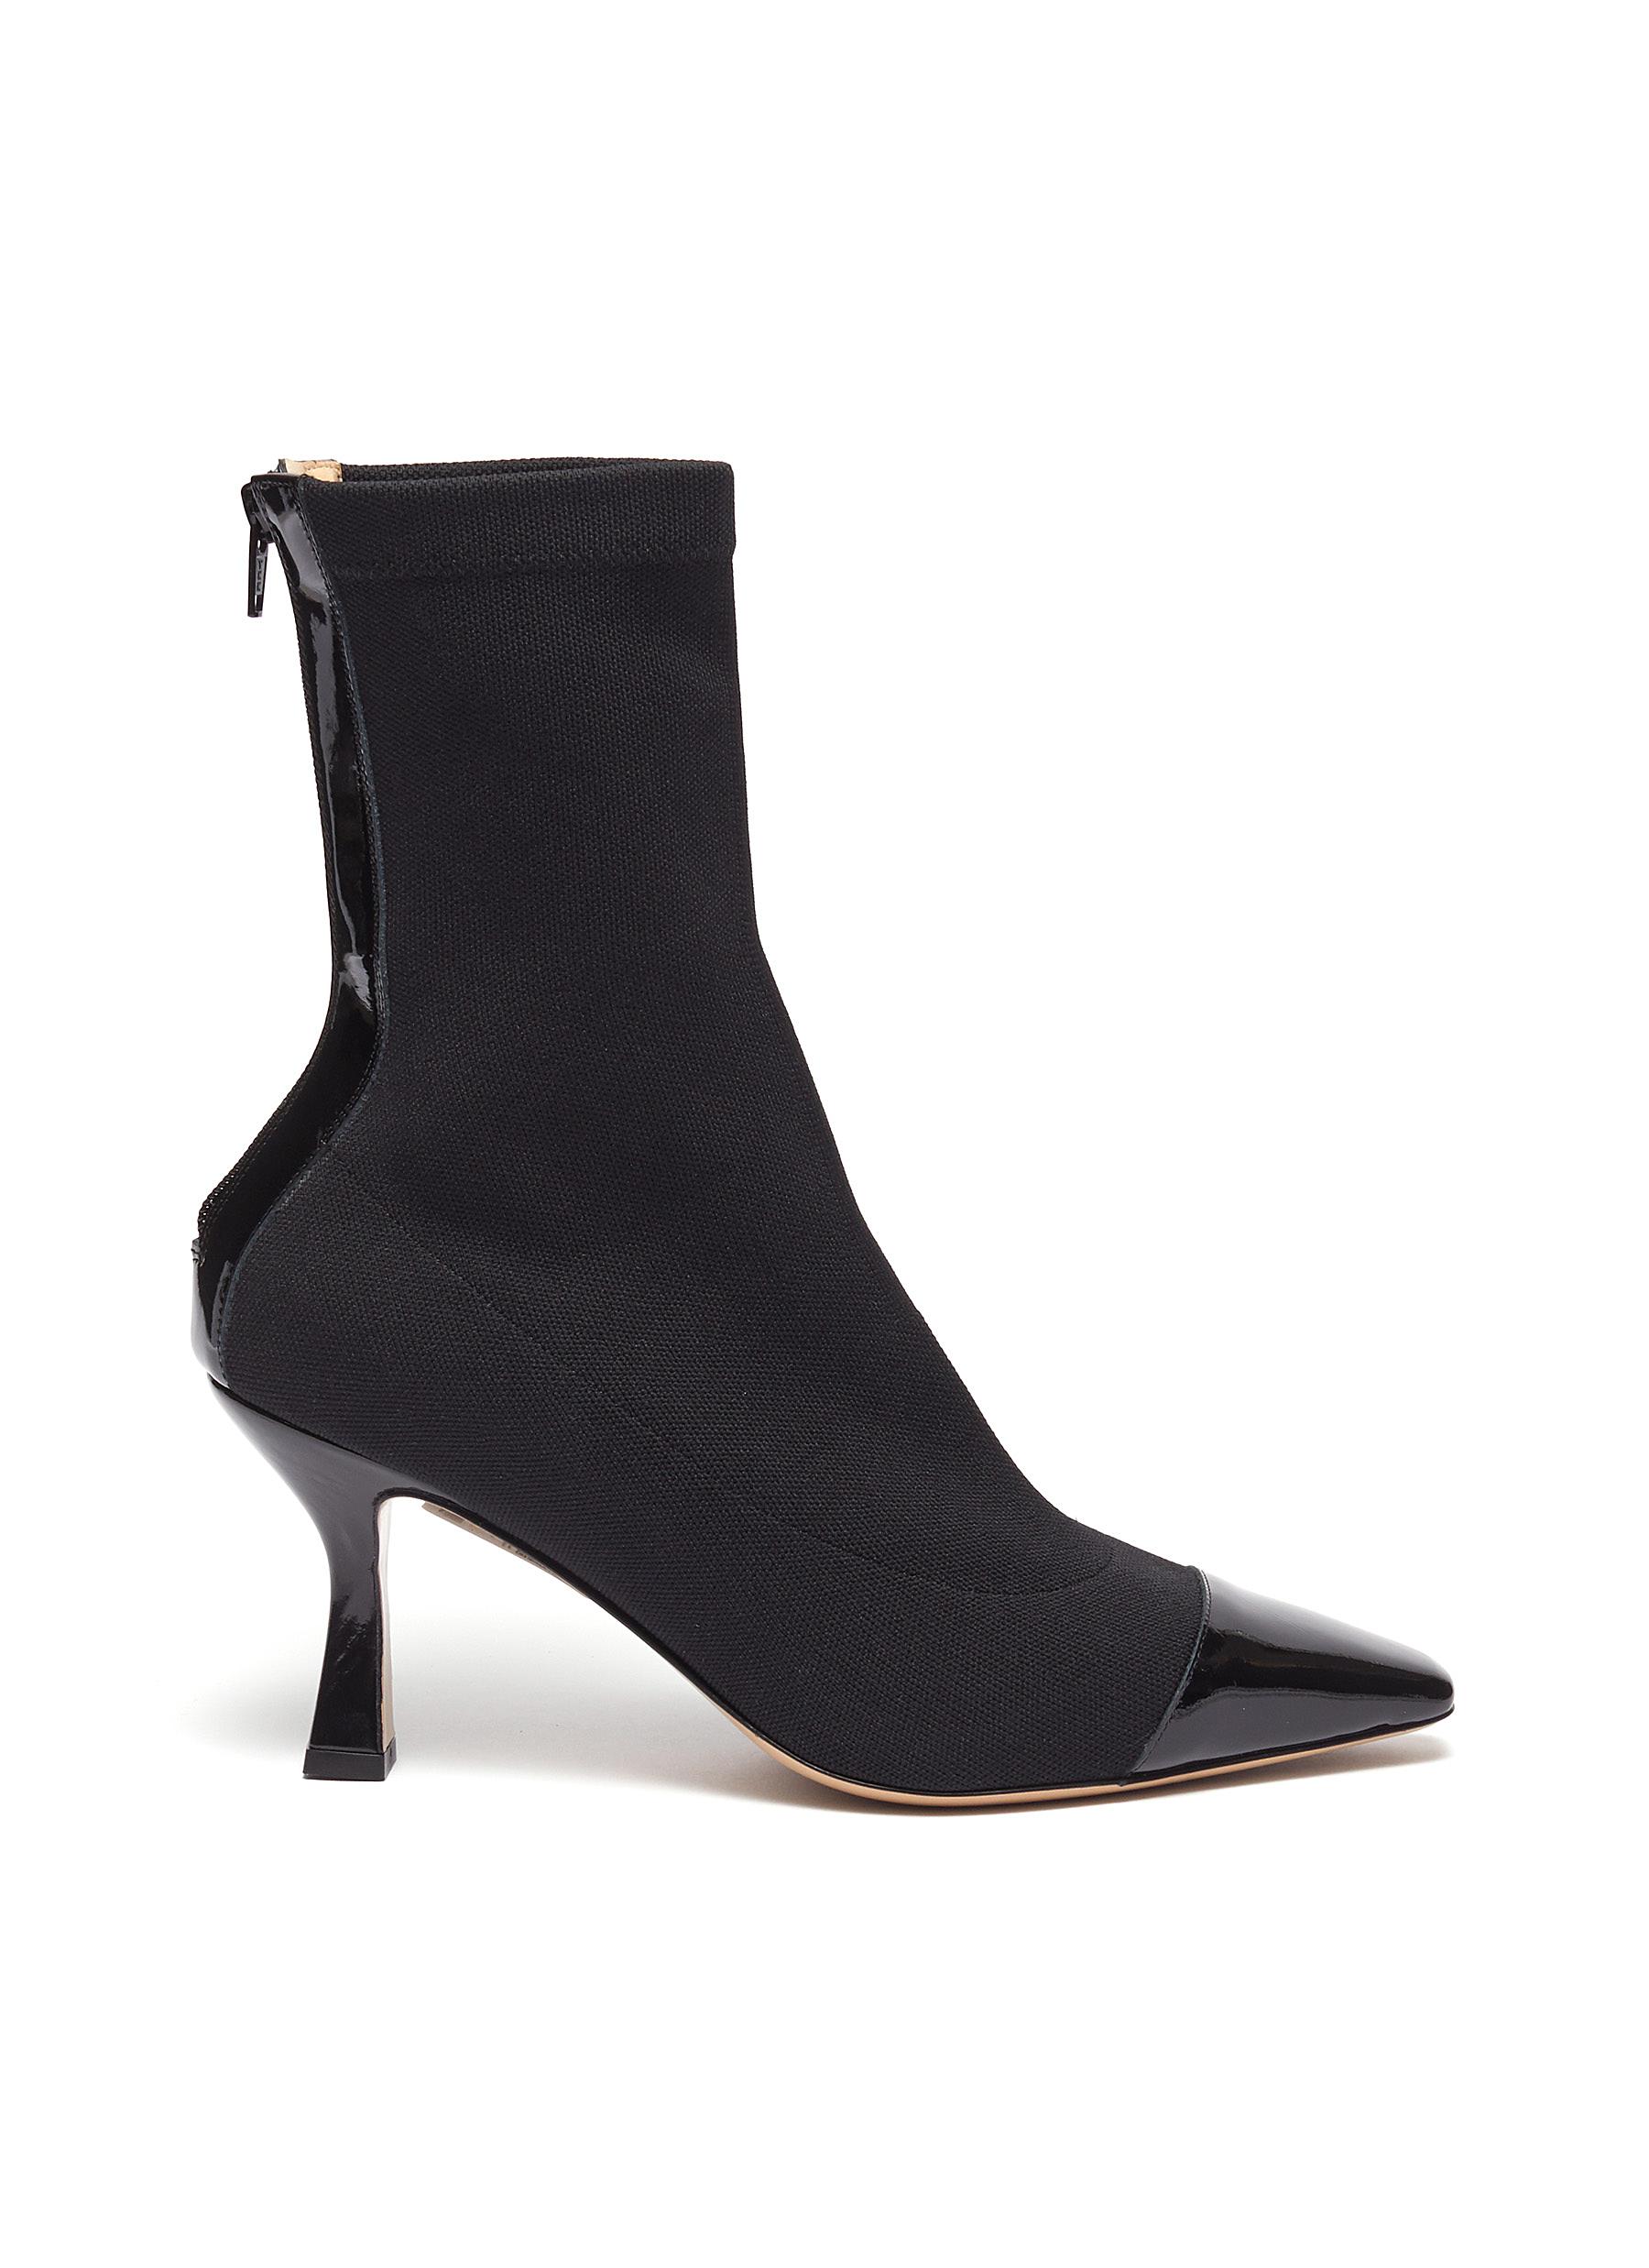 Contrast patent leather toe sock boots 